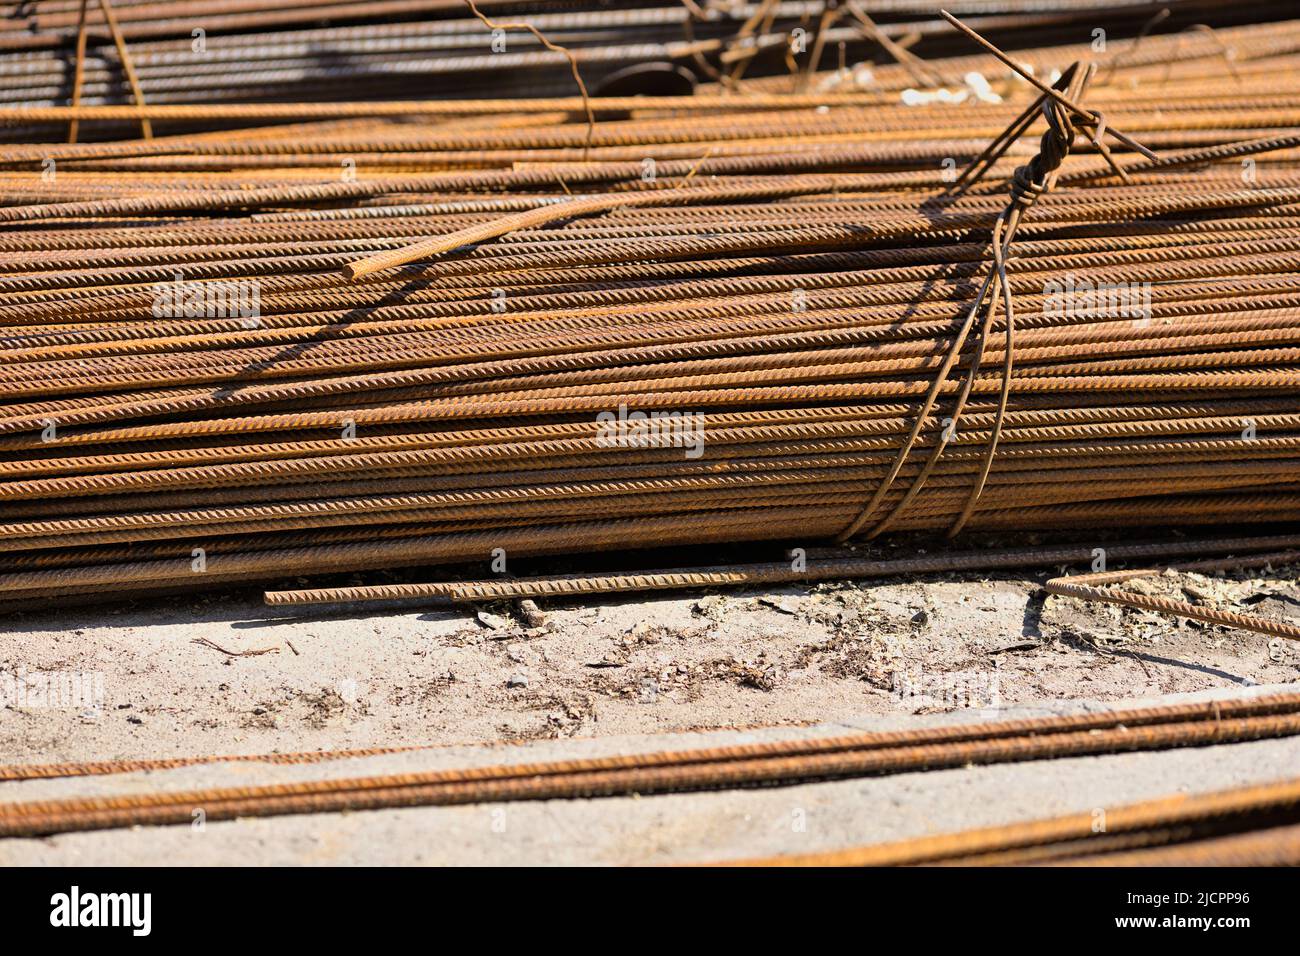 A bundle of rebar waiting on a construction project Stock Photo